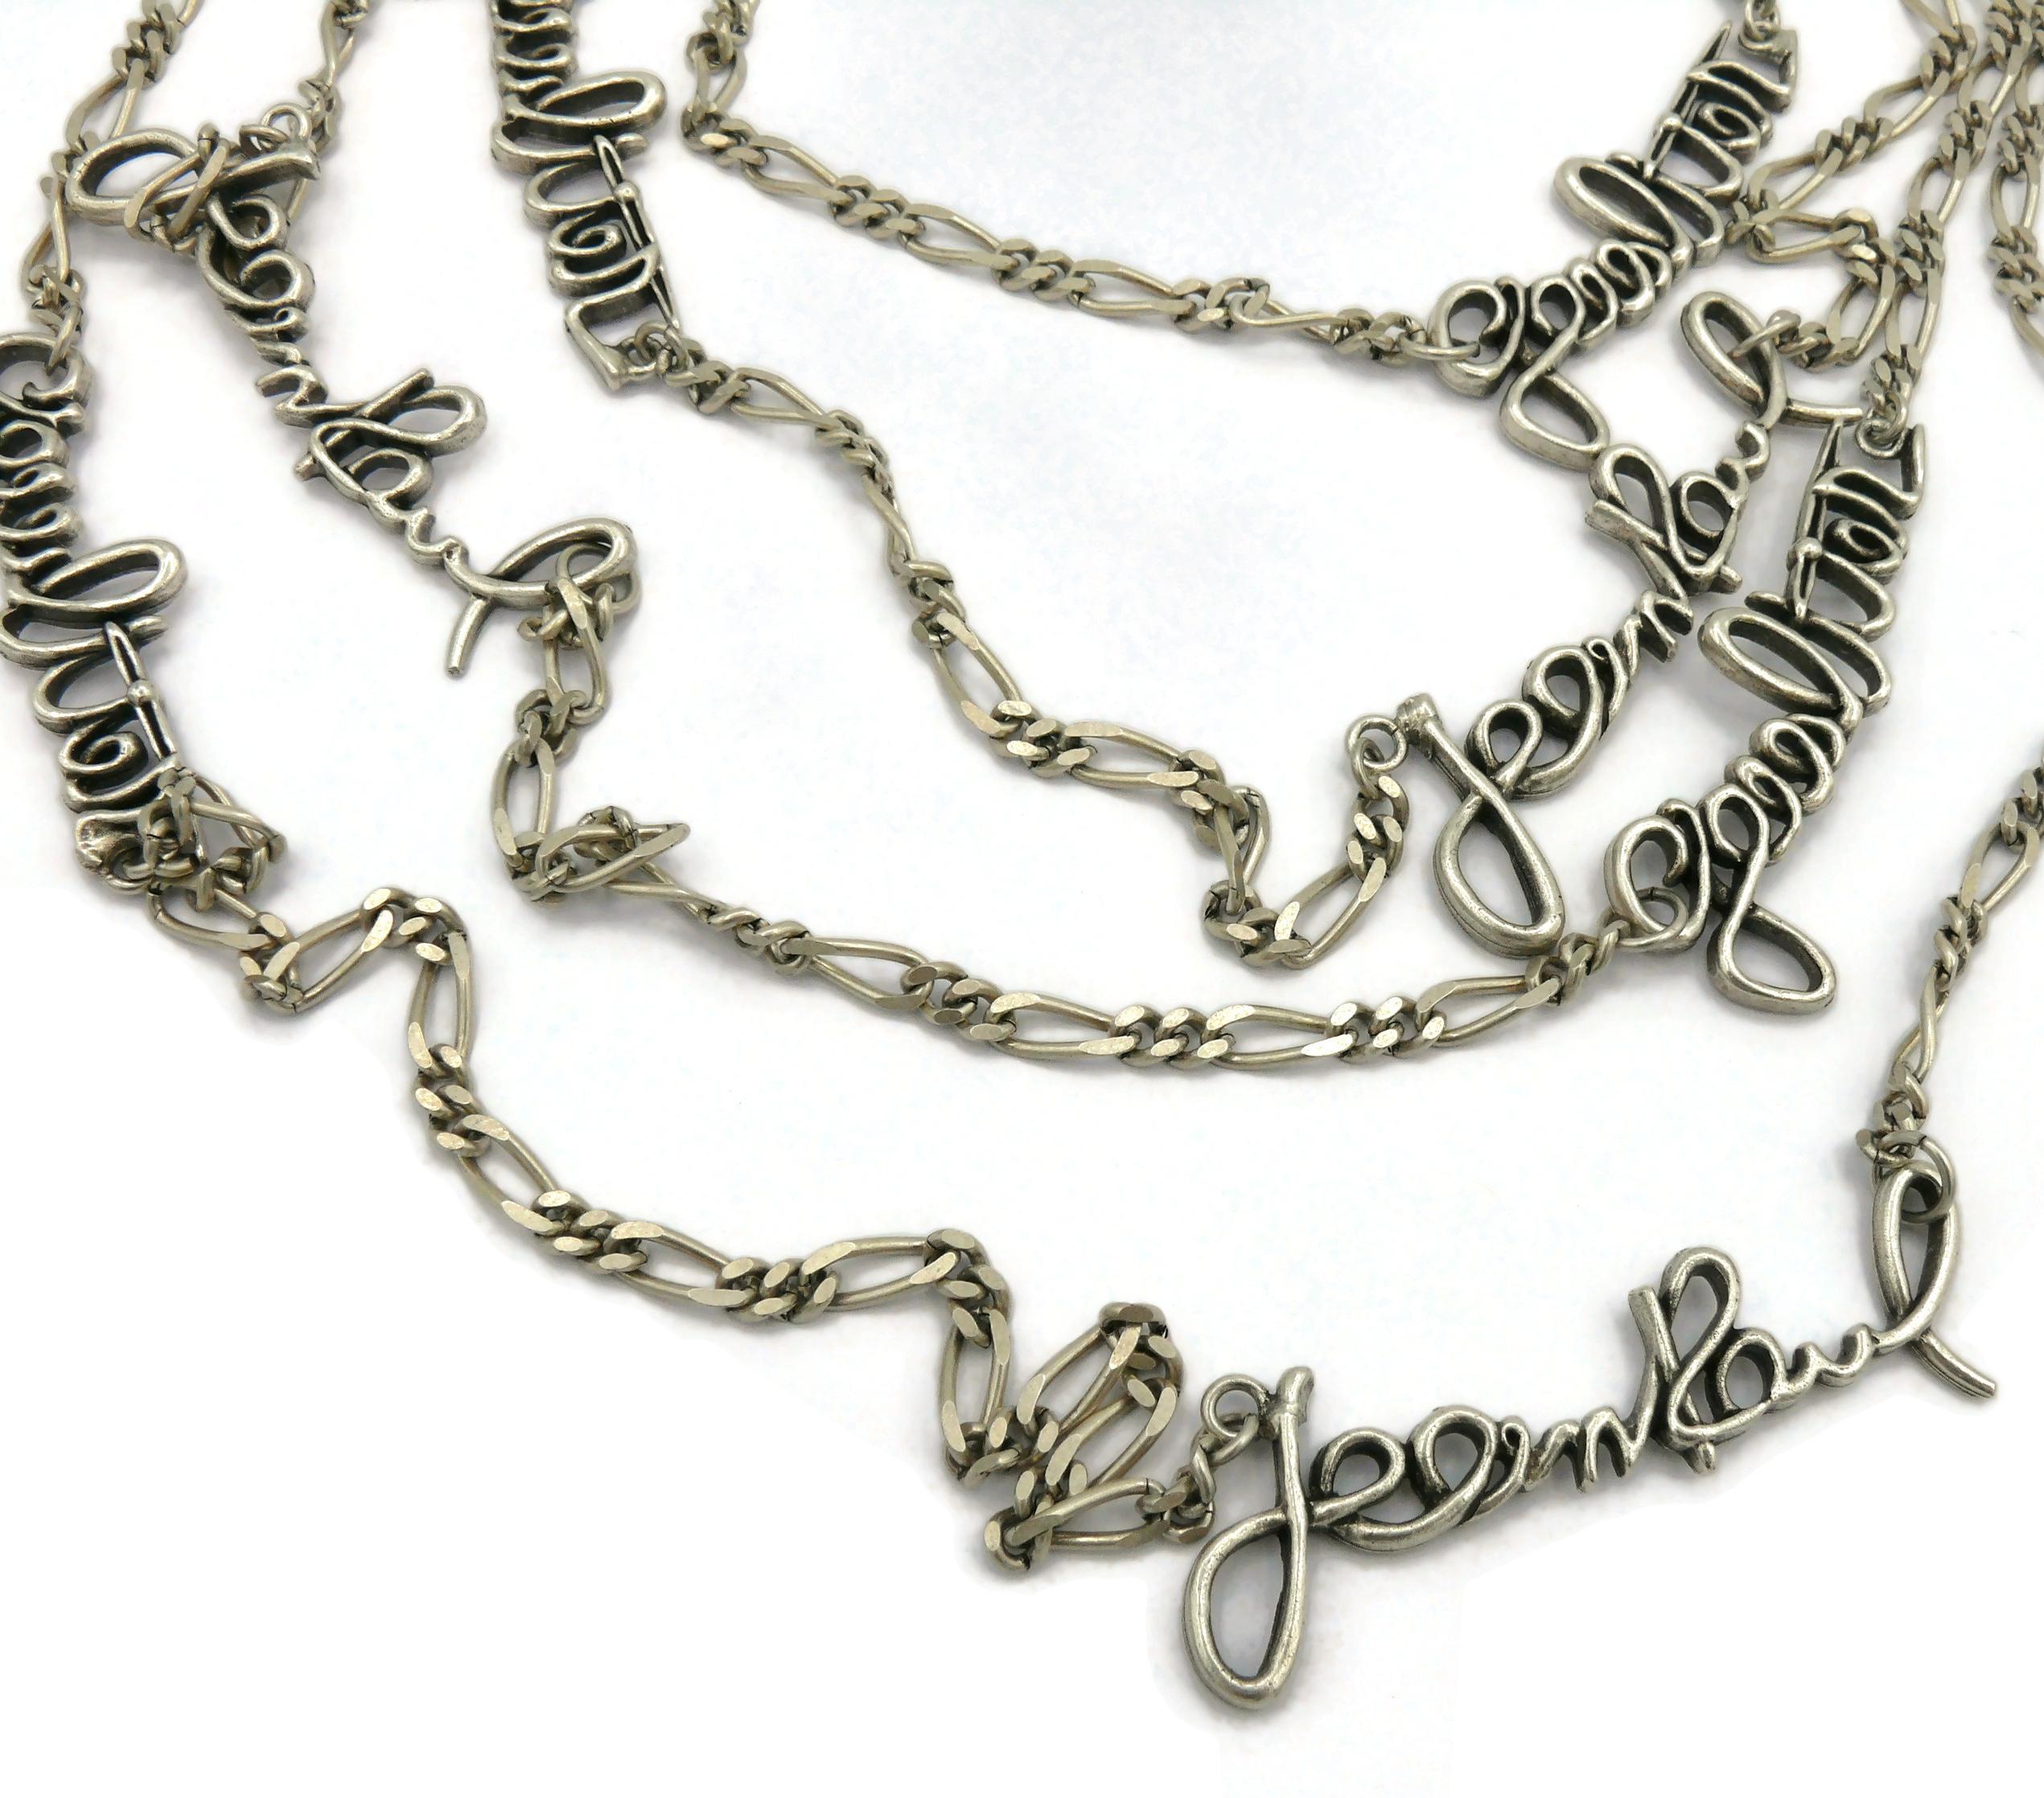 JEAN PAUL GAULTIER Silver Tone Cursive Signature Multi-Strand Necklace In Excellent Condition For Sale In Nice, FR